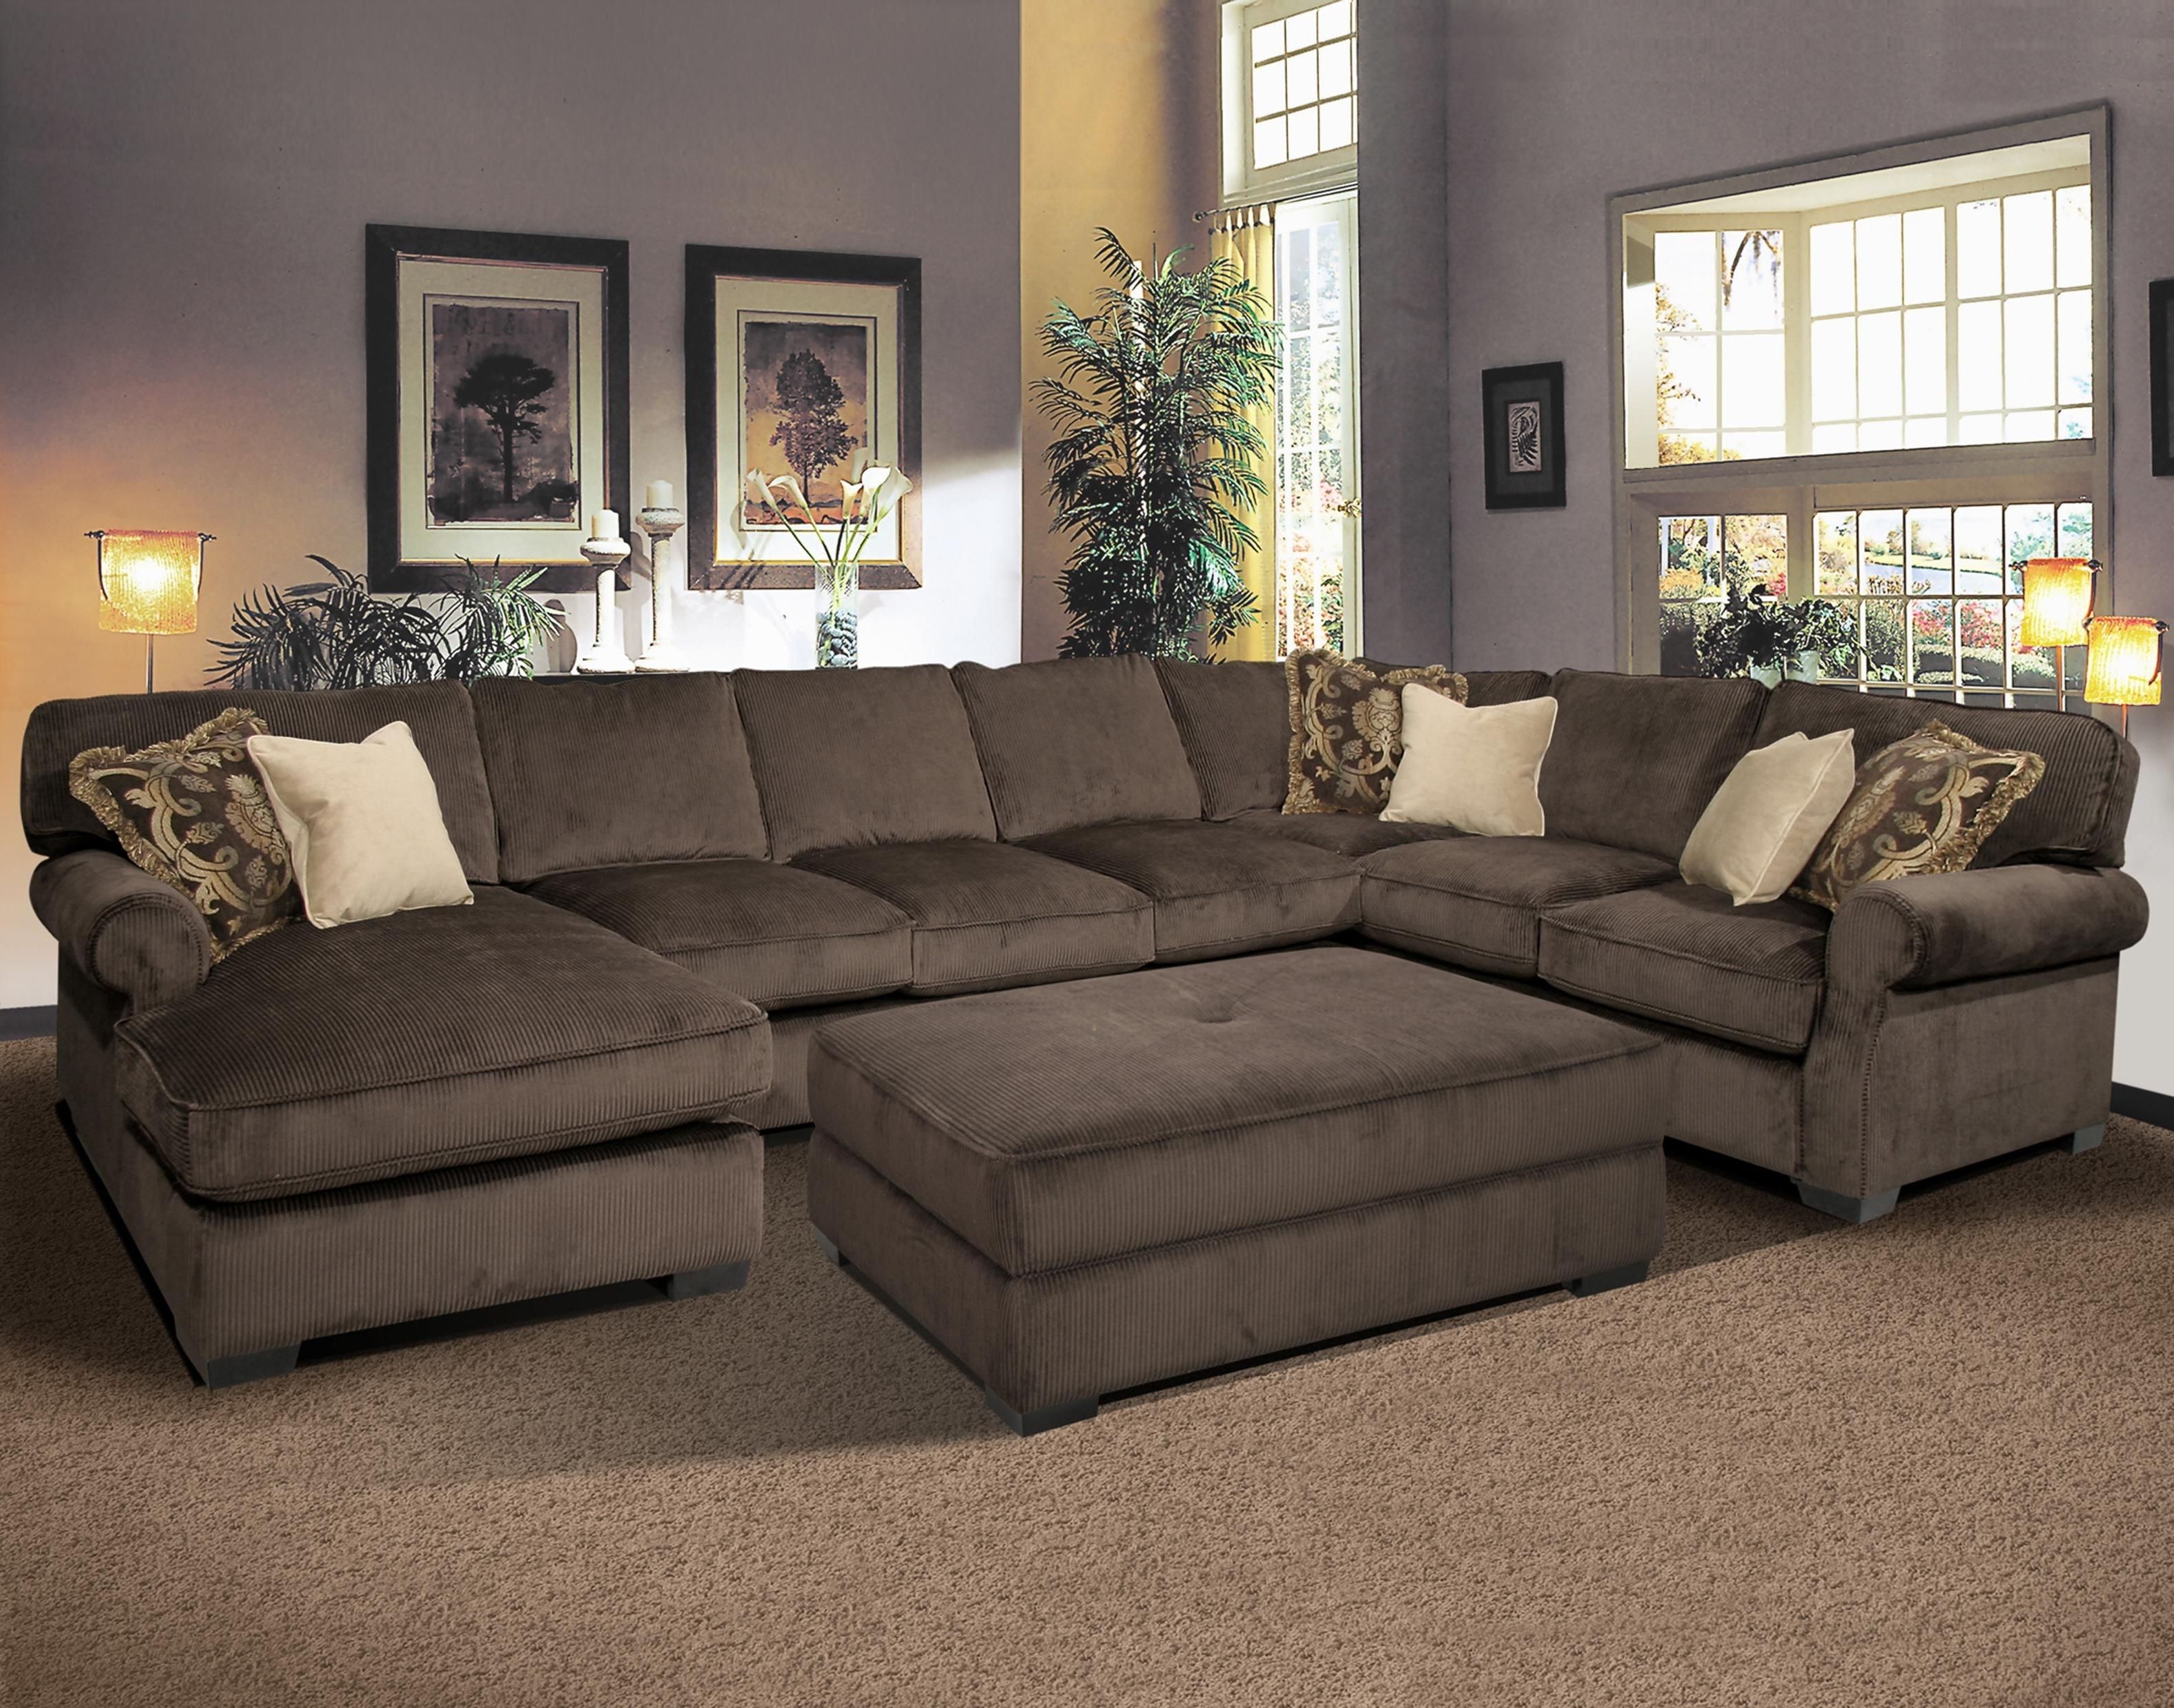 Lubbock Sectional Sofas For Well Liked Big And Comfy Grand Island Large, 7 Seat Sectional Sofa With Right (View 3 of 20)